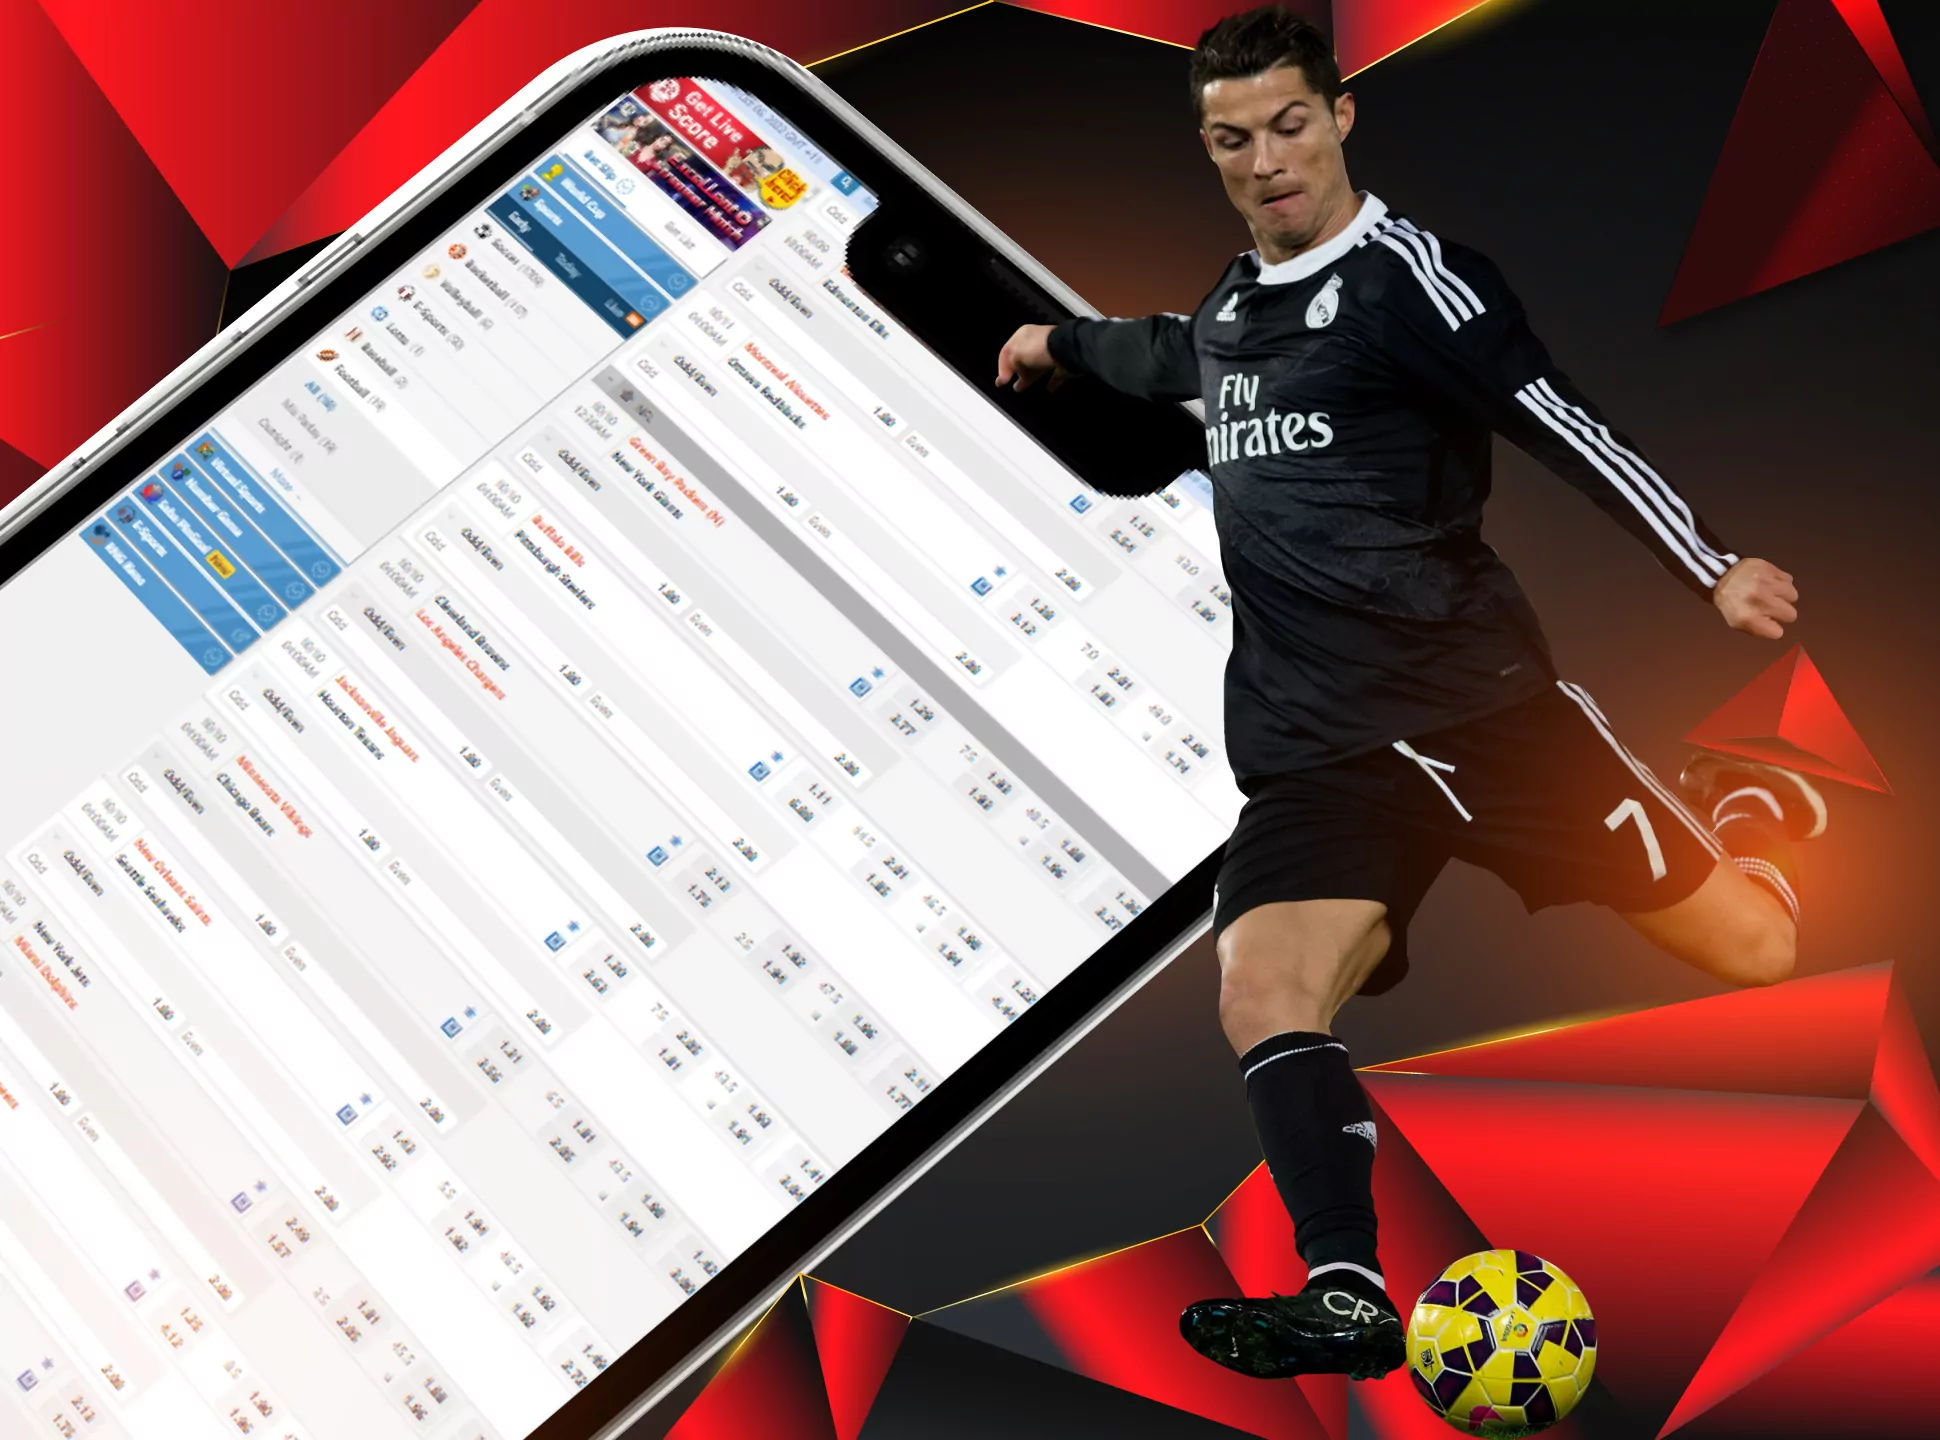 Marvelbet offers a lot of football events in its sportsbook.